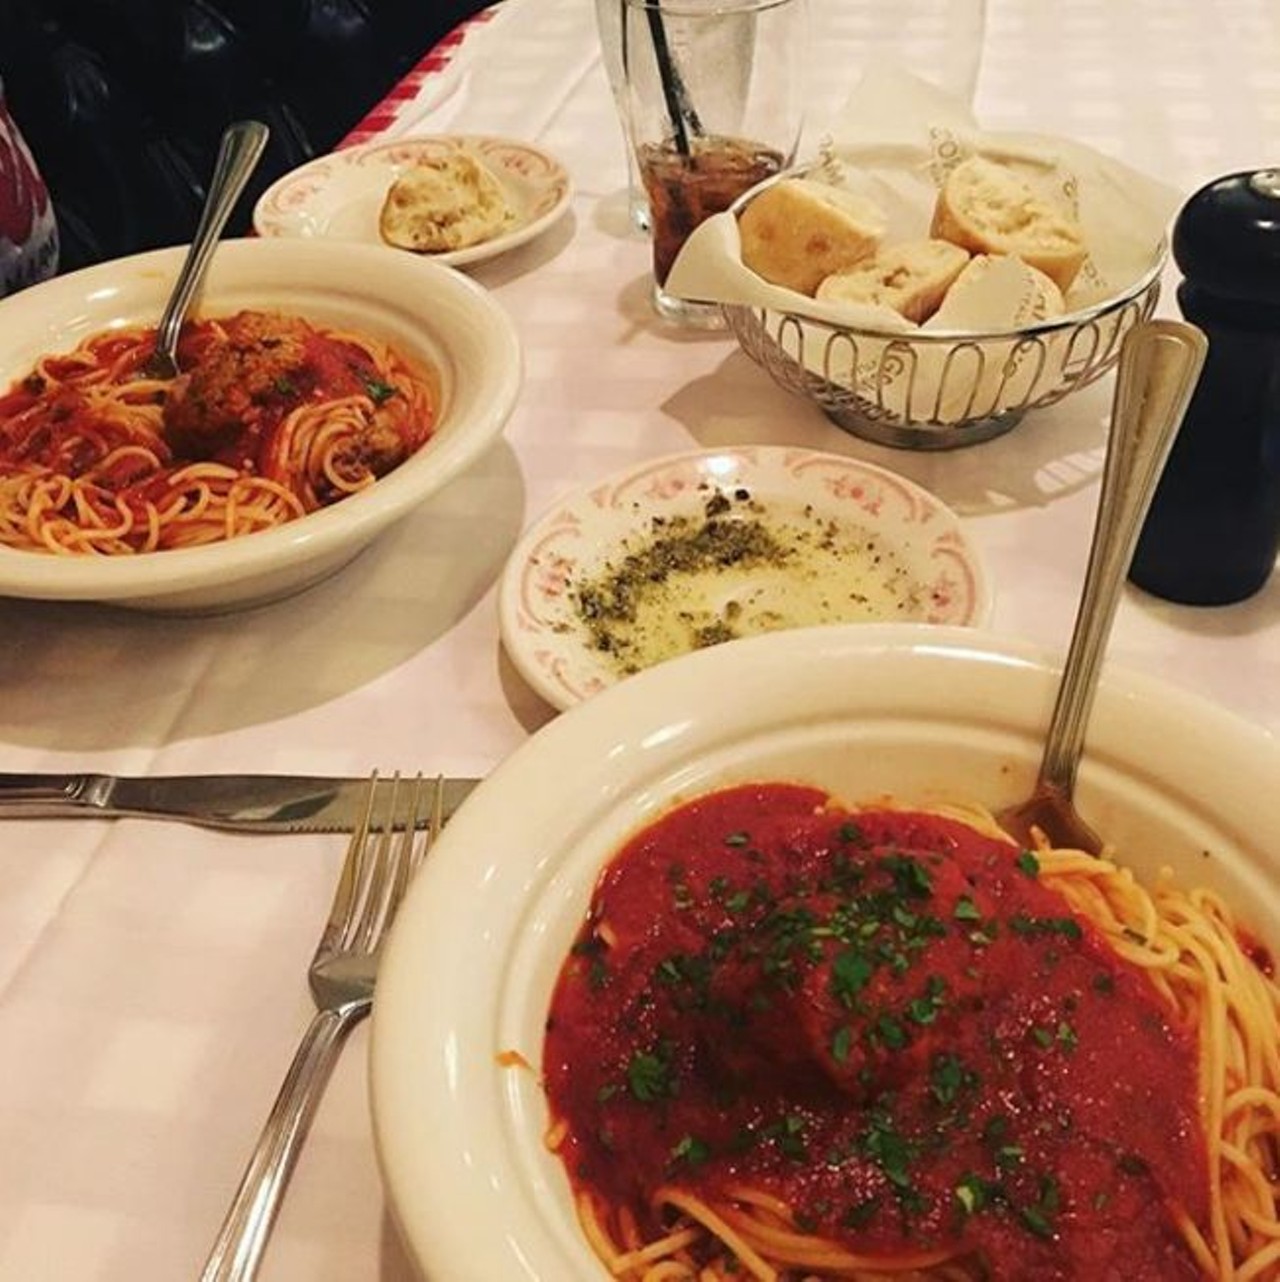 Maggiano&#146;s Little Italy
17603 IH 10W, (210) 451-6000, maggianos.com
Have a filling meal at lunch, or keep it lighter (but just as tasty) with brunch. Lemon ricotta pancakes? Italian sausage frittata? We're sold.
Photo via Instagram, west_texas_